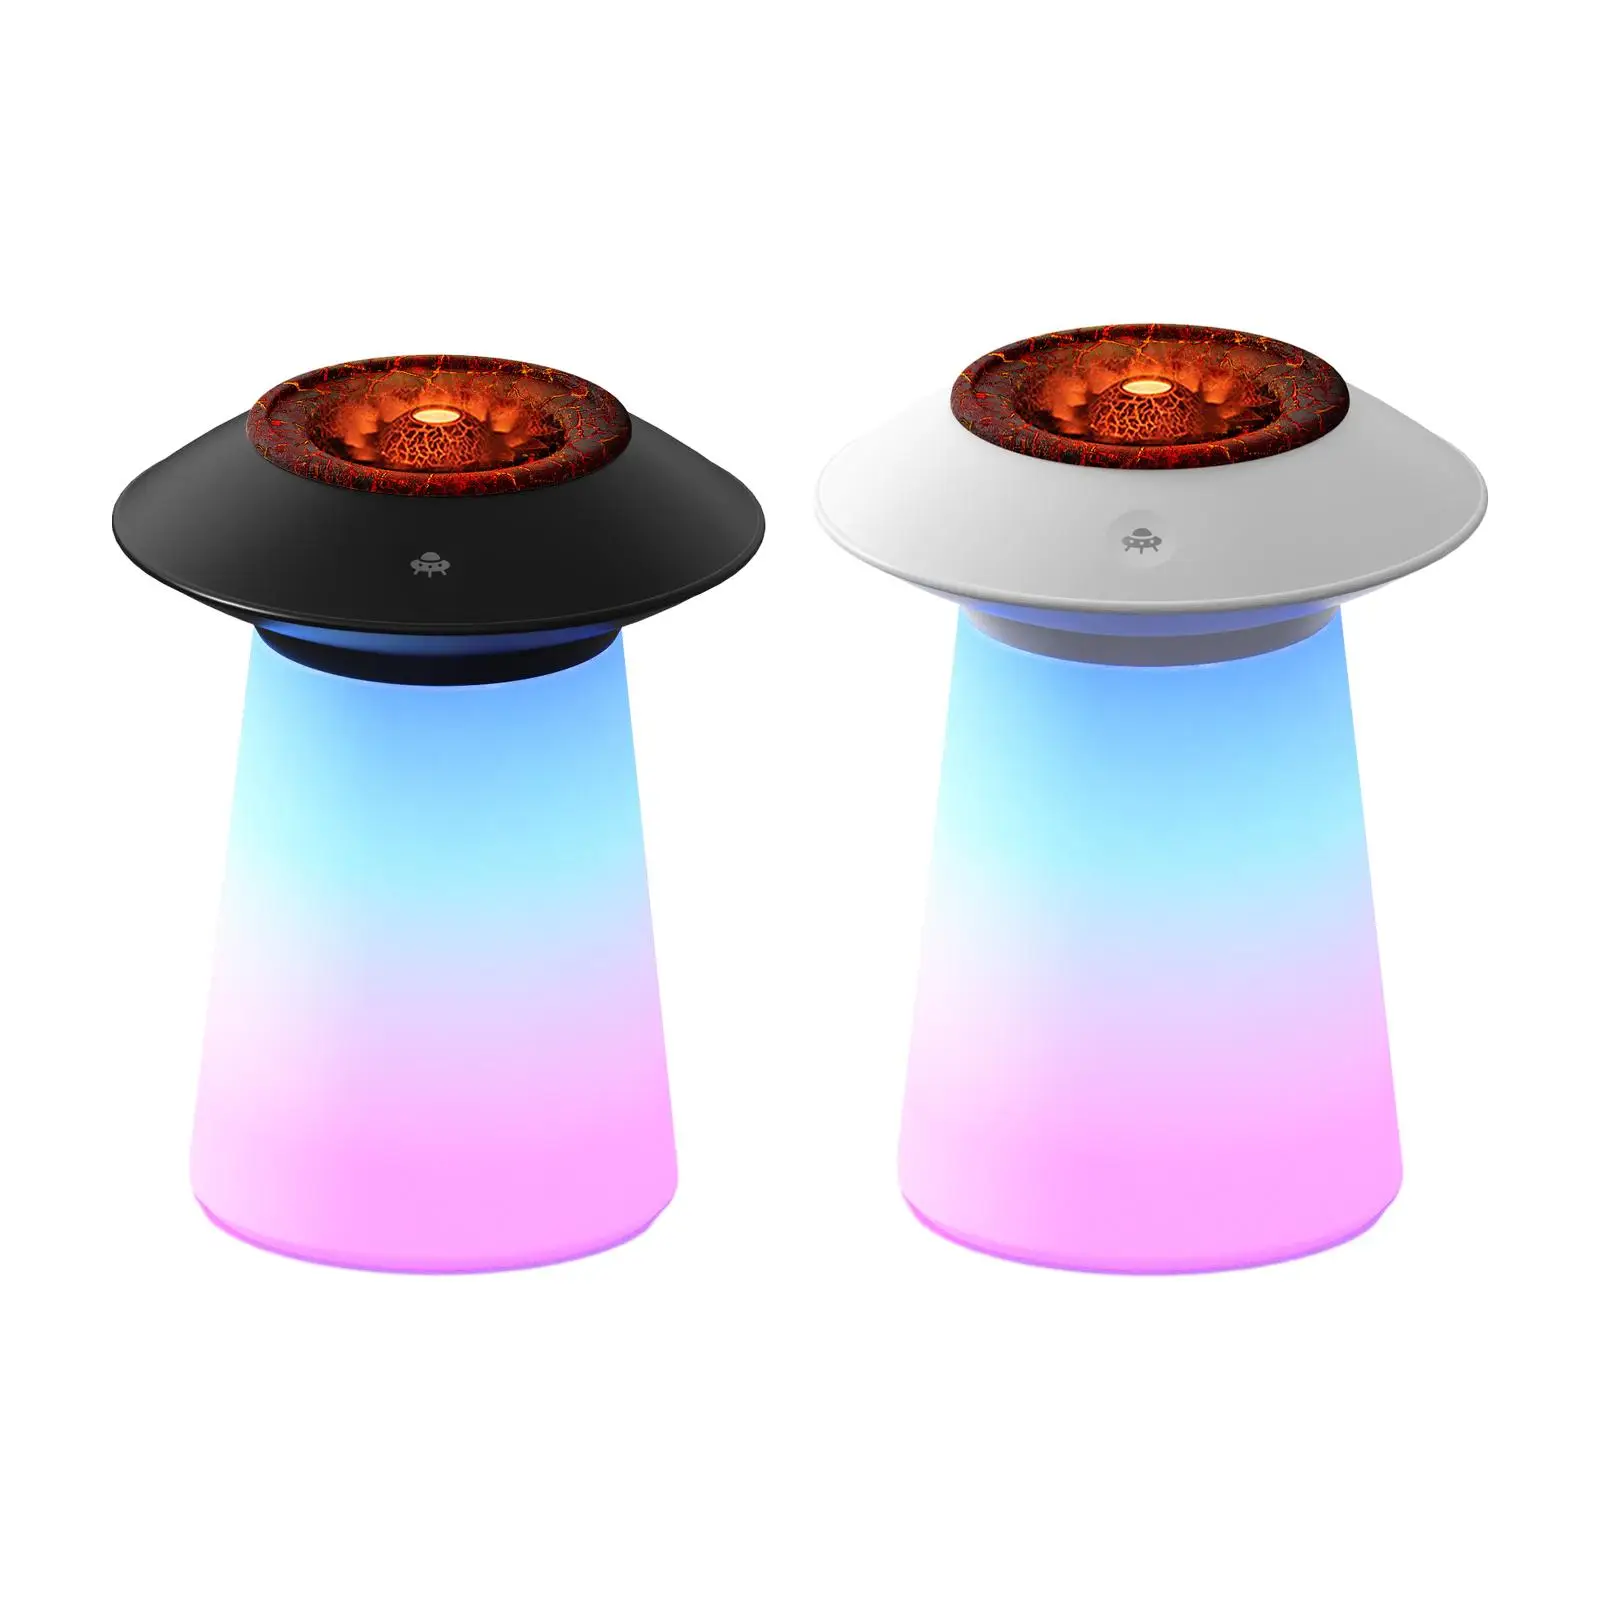 Fragrance Oil Diffuser Colorful Night Light Type C Air Diffuser Humidifier Desktop Humidifier for Office Home Dorm Desktop